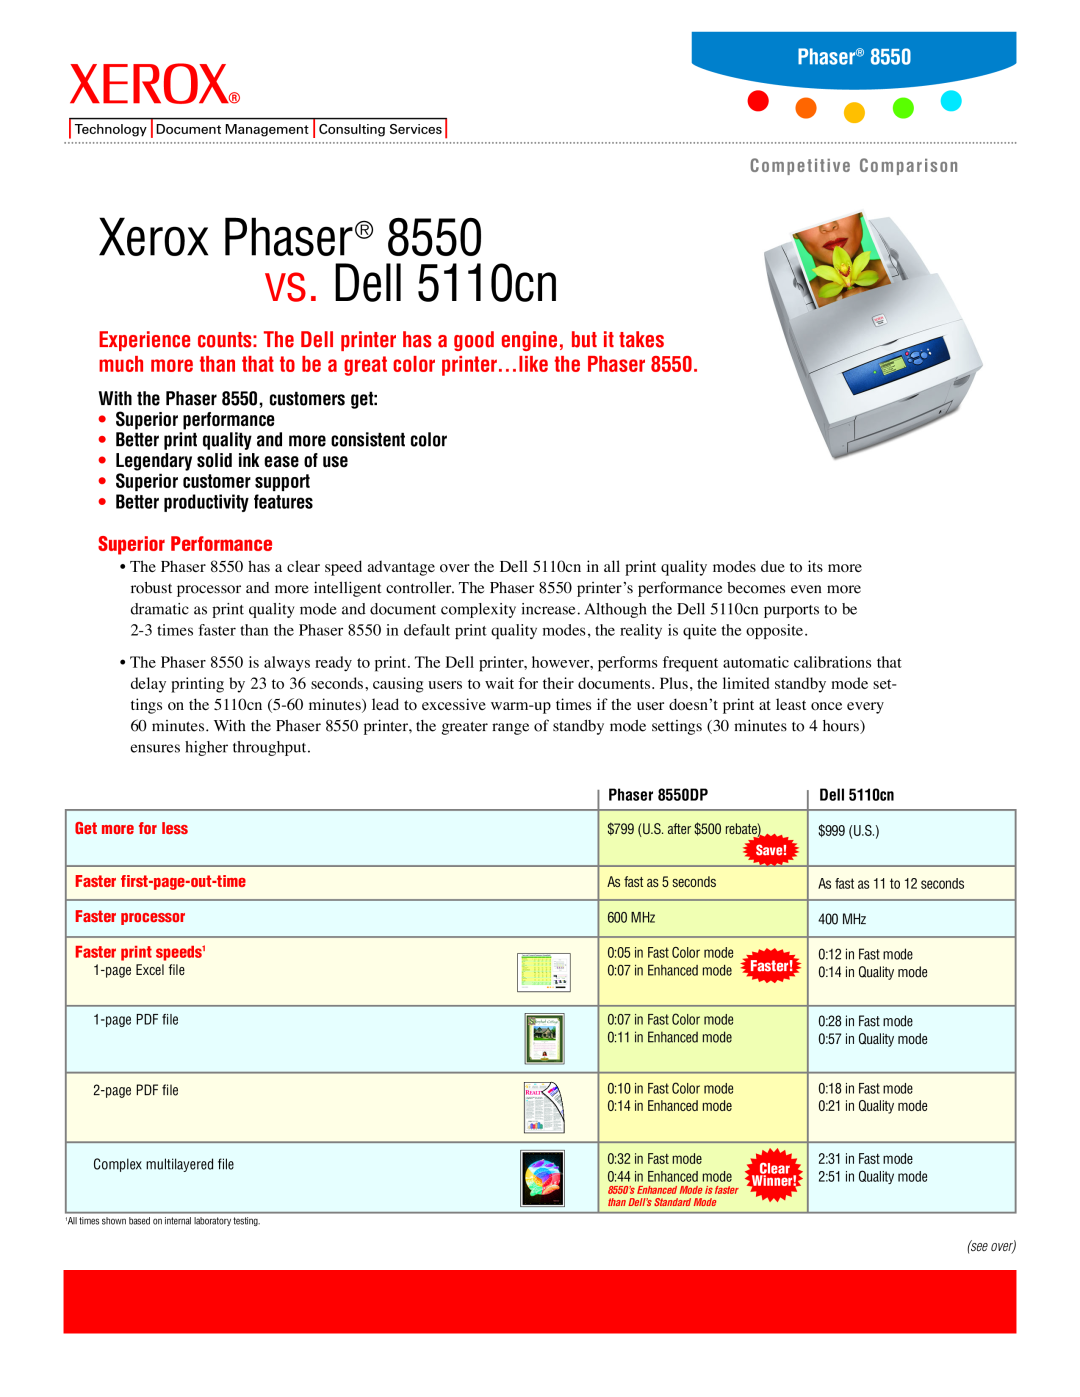 Xerox manual Xerox Phaser vs. Dell 5110cn, With the Phaser 8550, customers get, Superior performance, Phaser 8550DP 